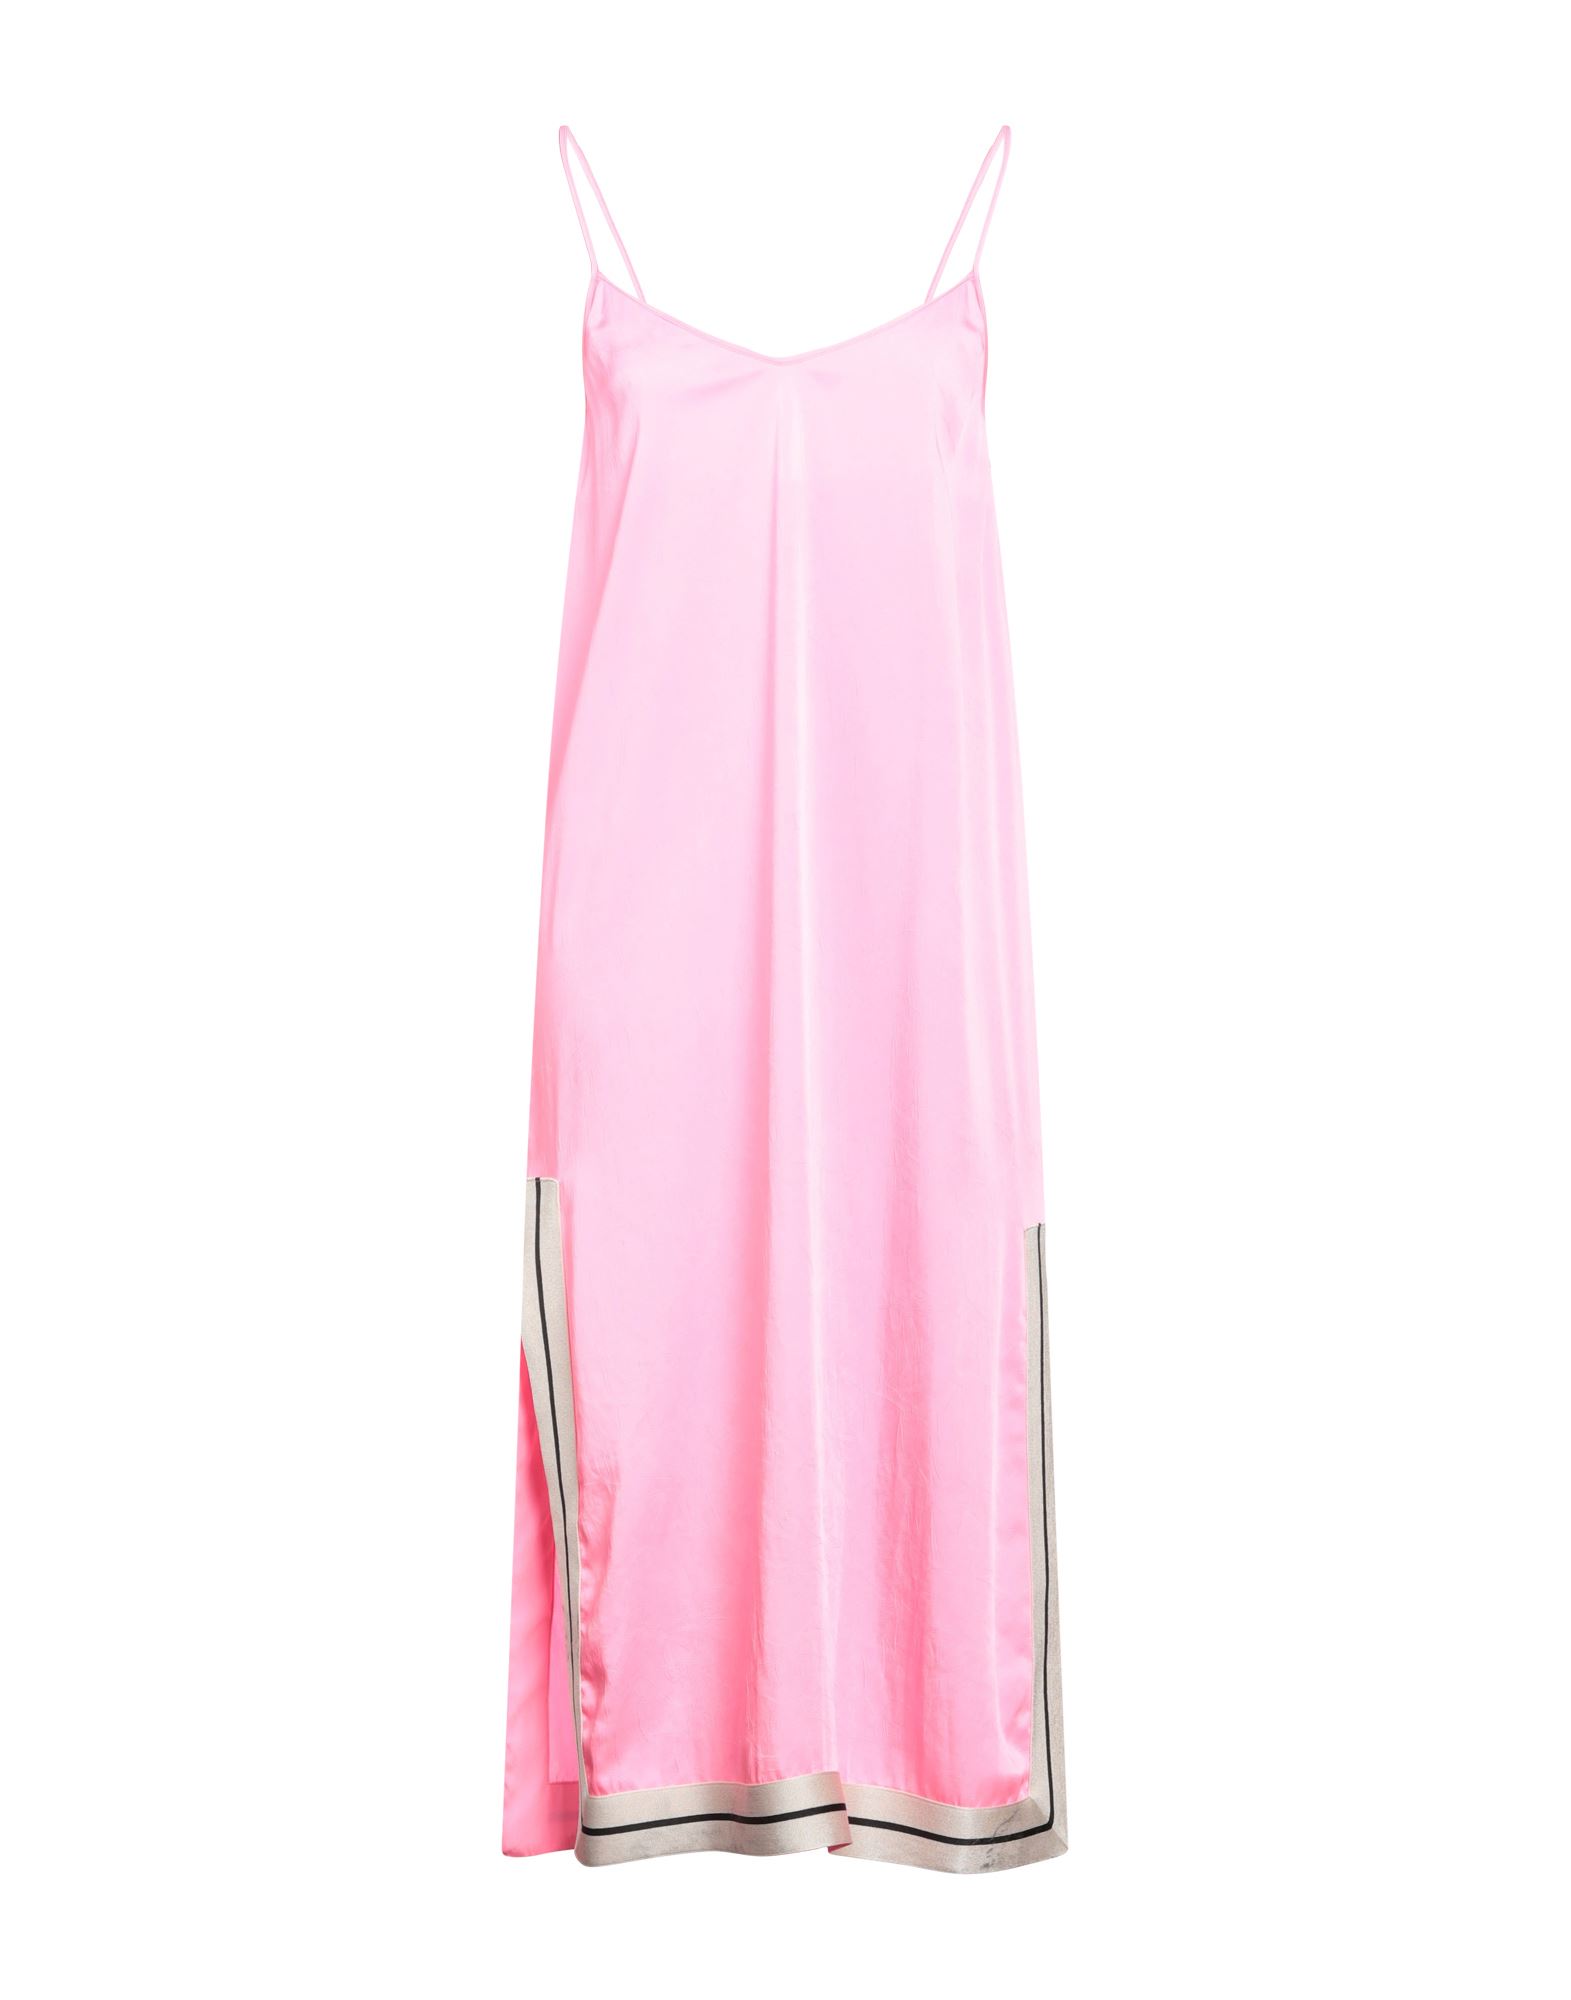 PALM ANGELS PALM ANGELS WOMAN MIDI DRESS PINK SIZE S POLYESTER